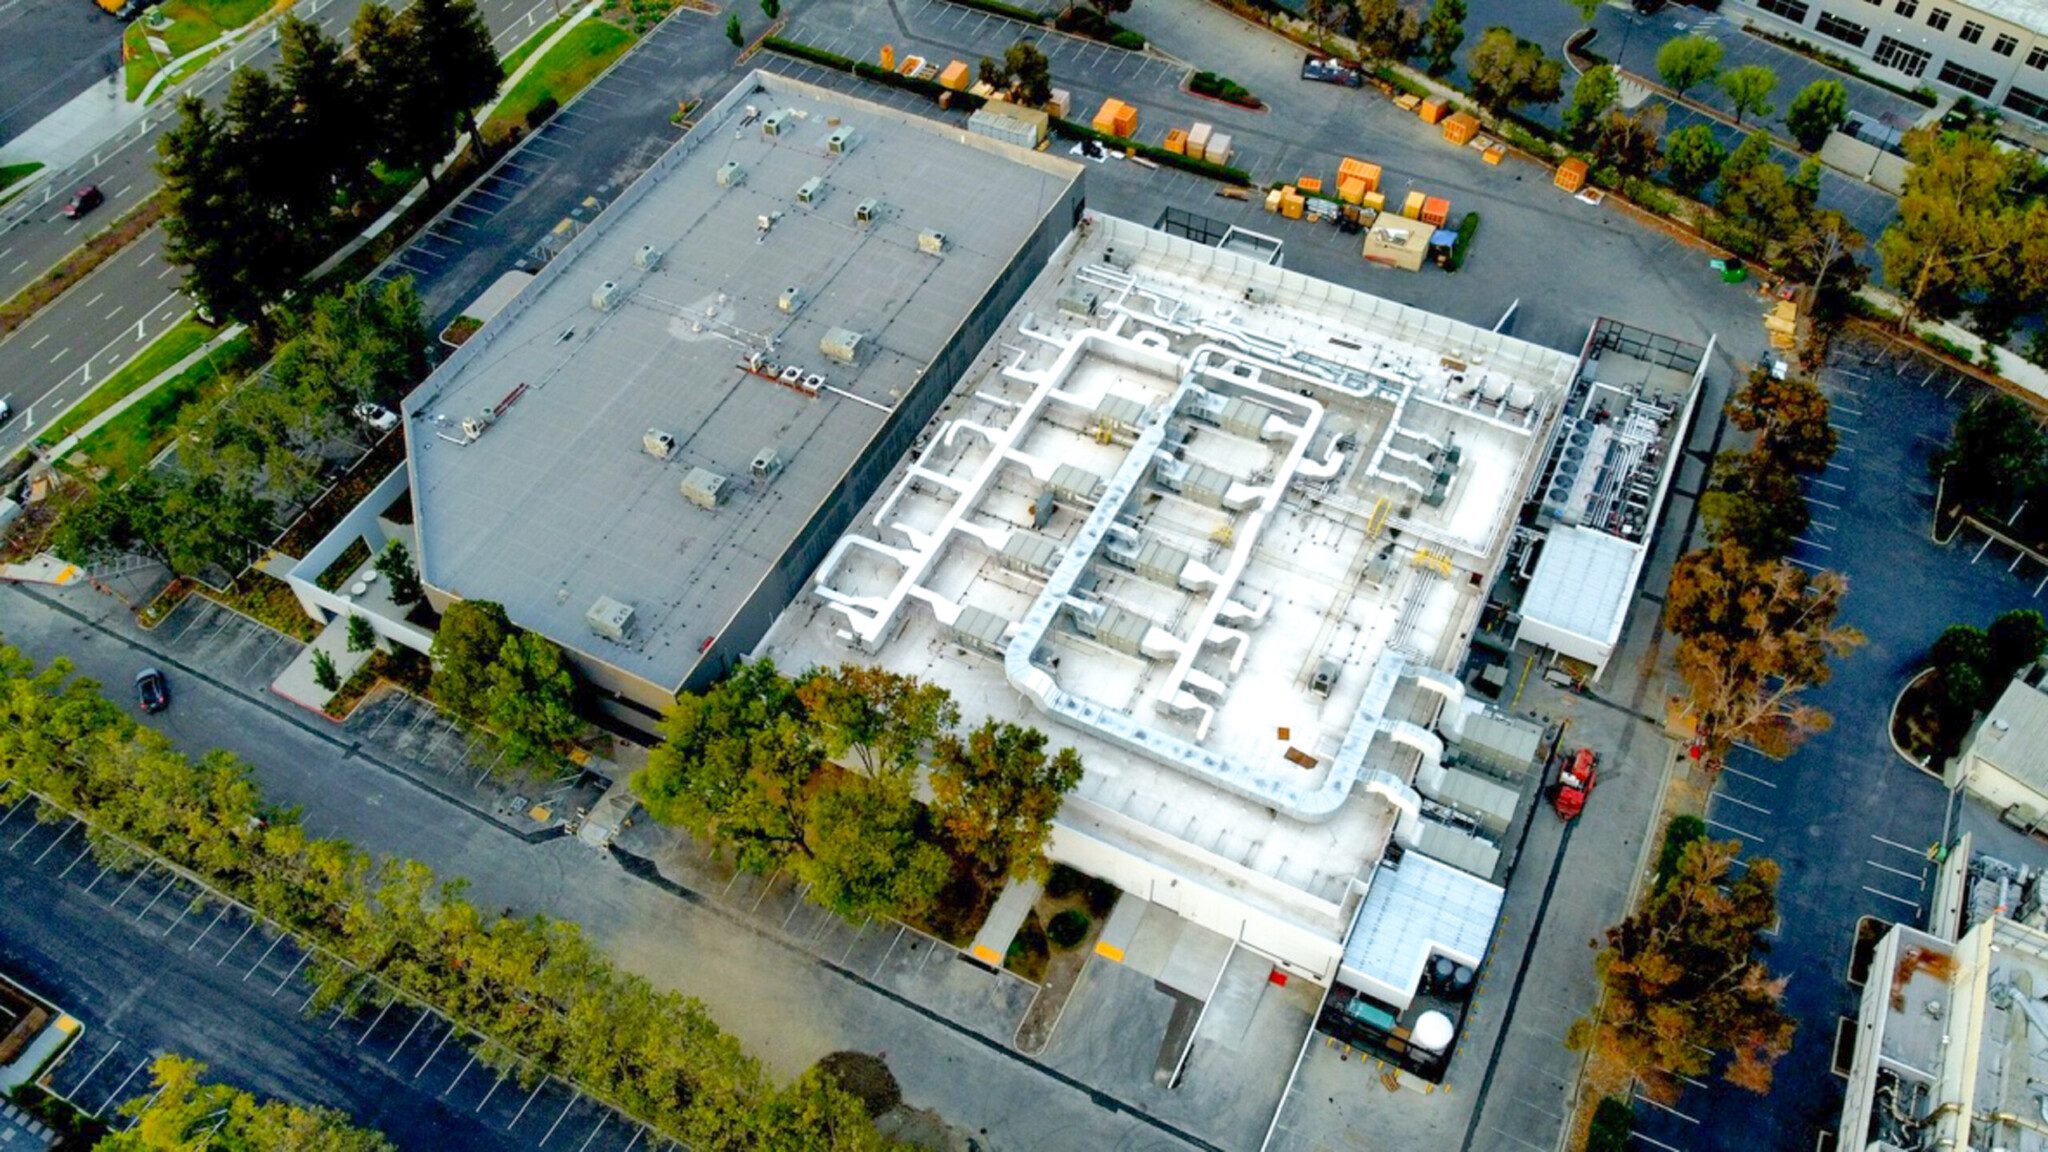 Drone view of rooftop appliances held by structural suppports